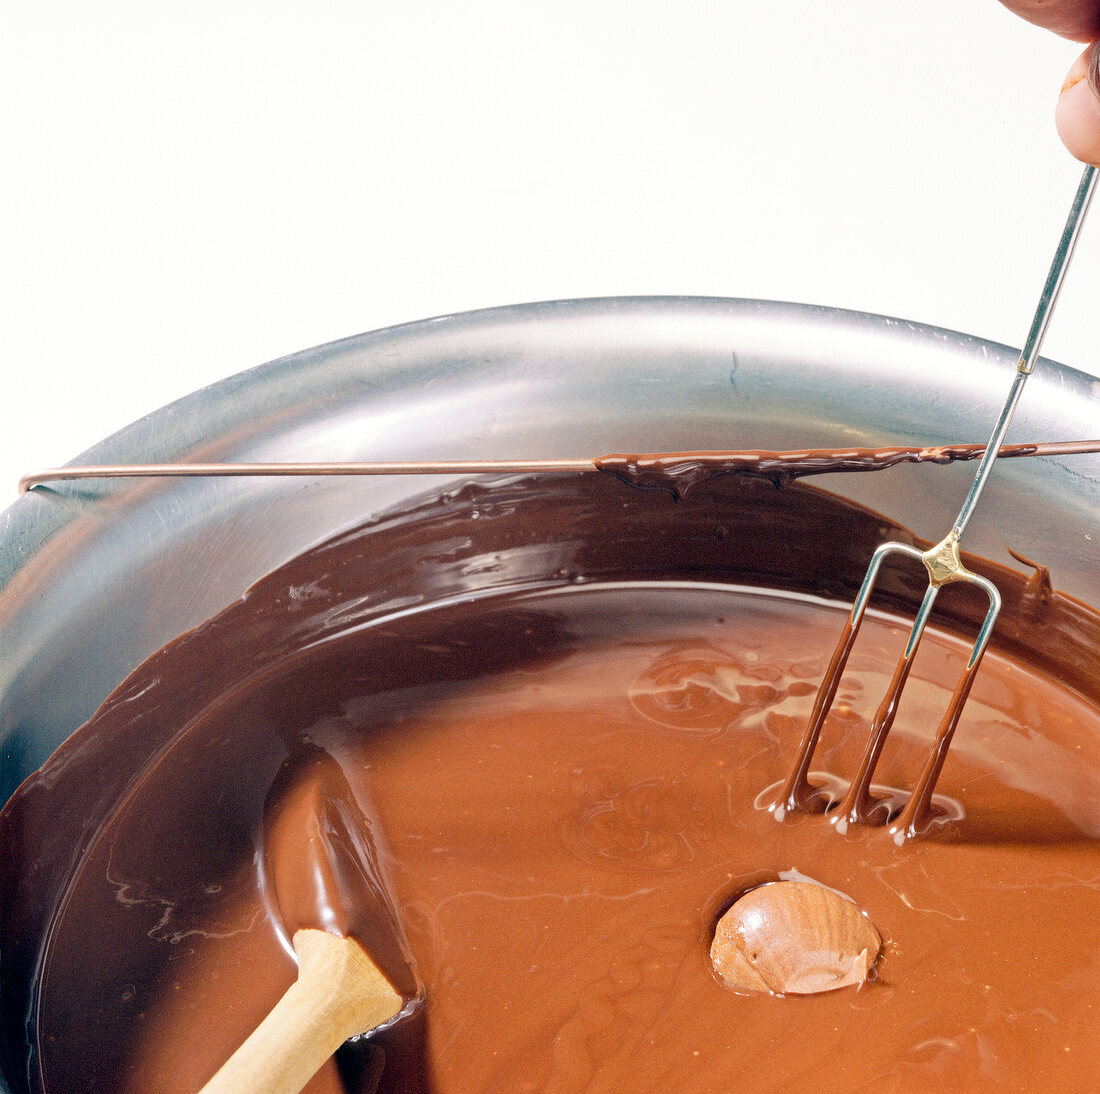 Close-up of ganache balls being dipped in melted chocolate, step 1